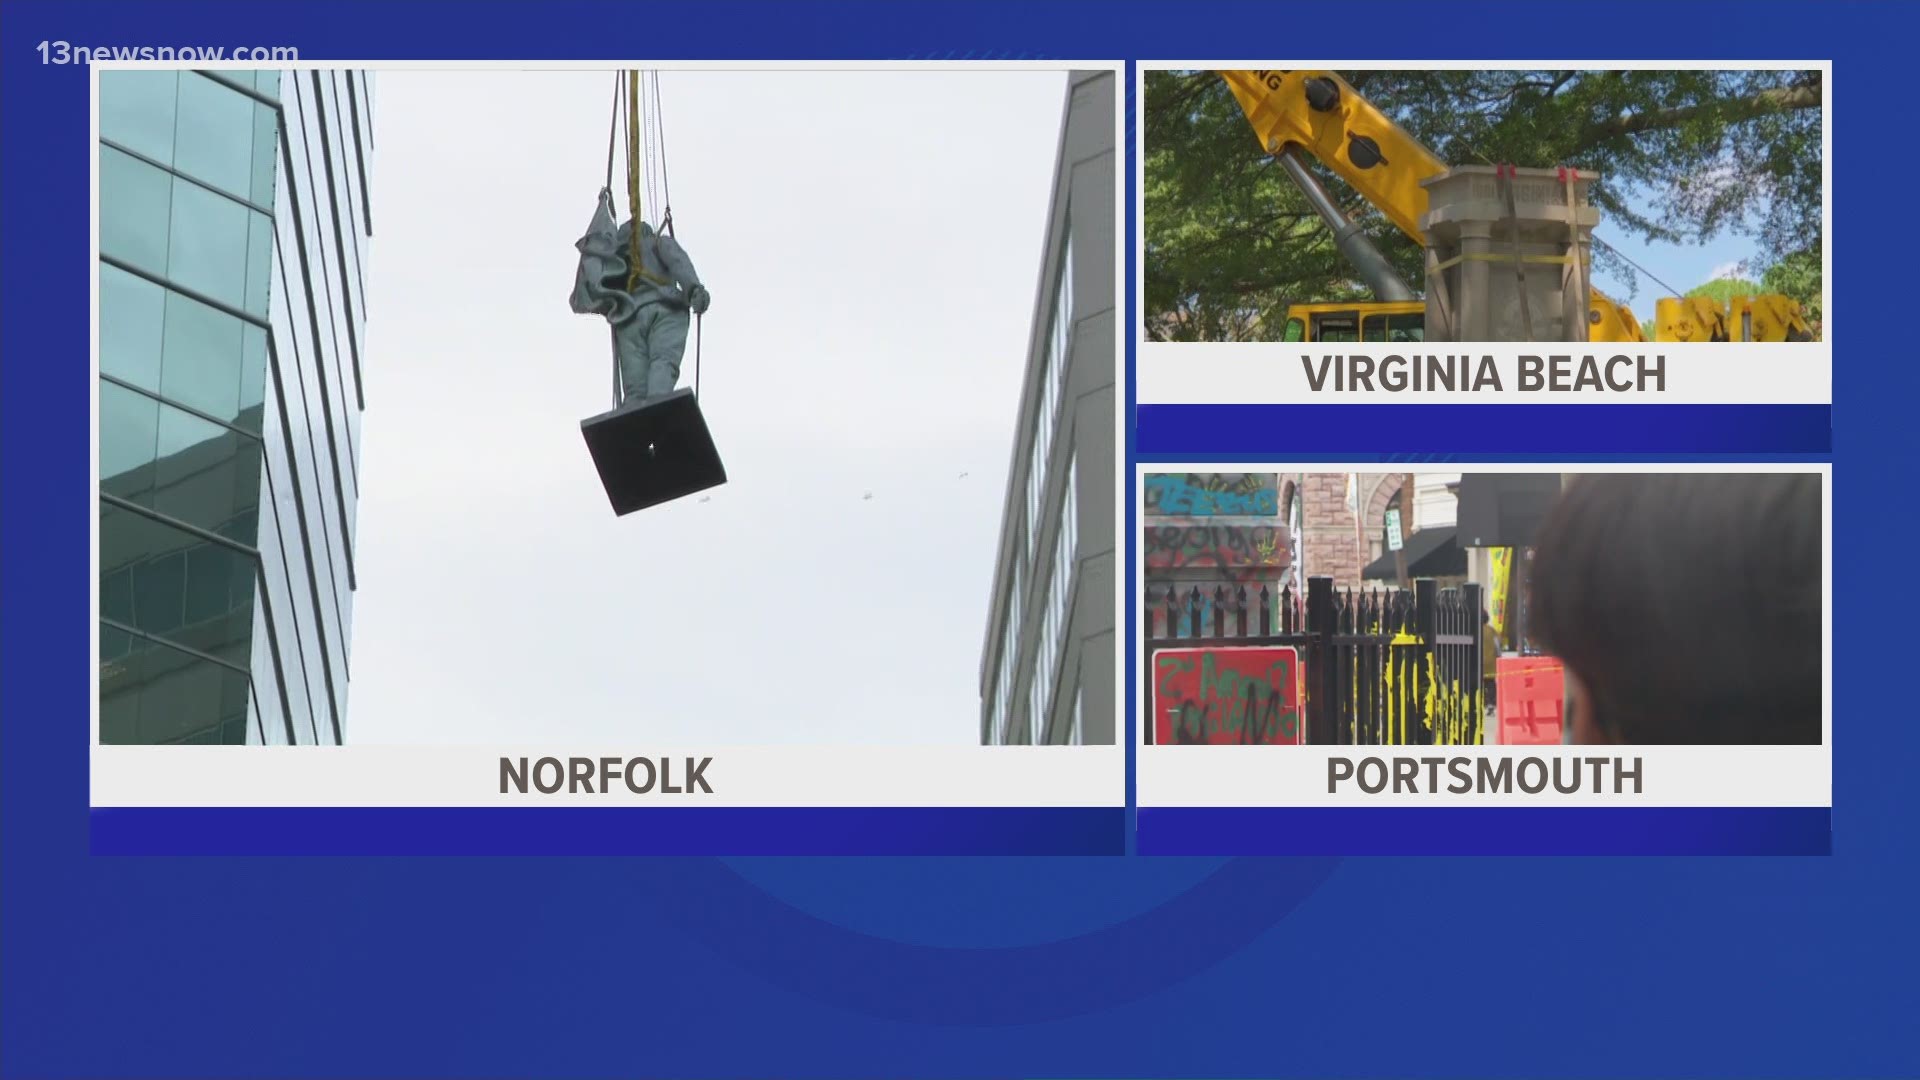 Virginia has taken down the most monuments and statues, with 40 removed so far.